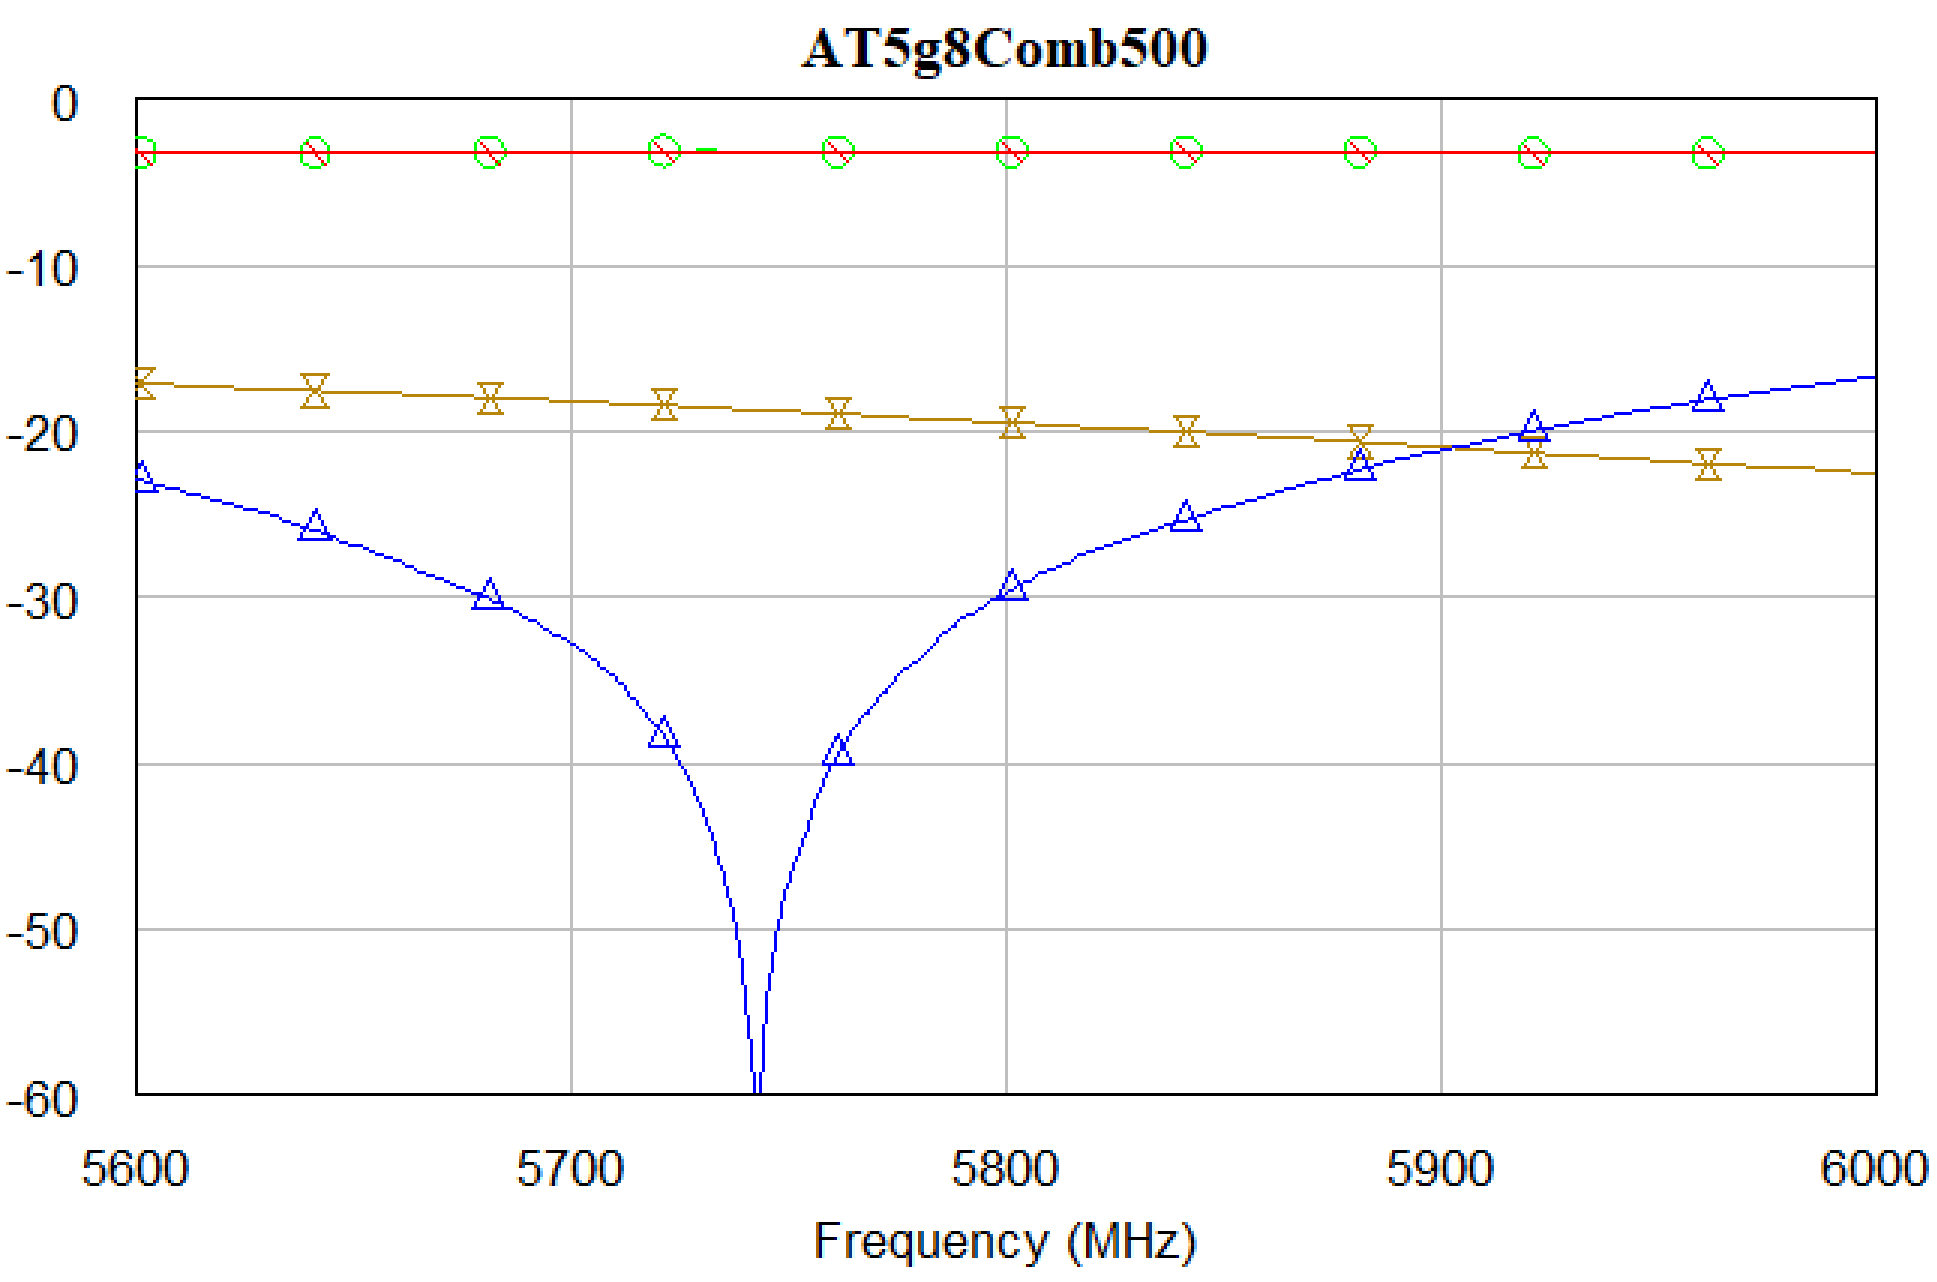 Performance of AT5g8Comb500